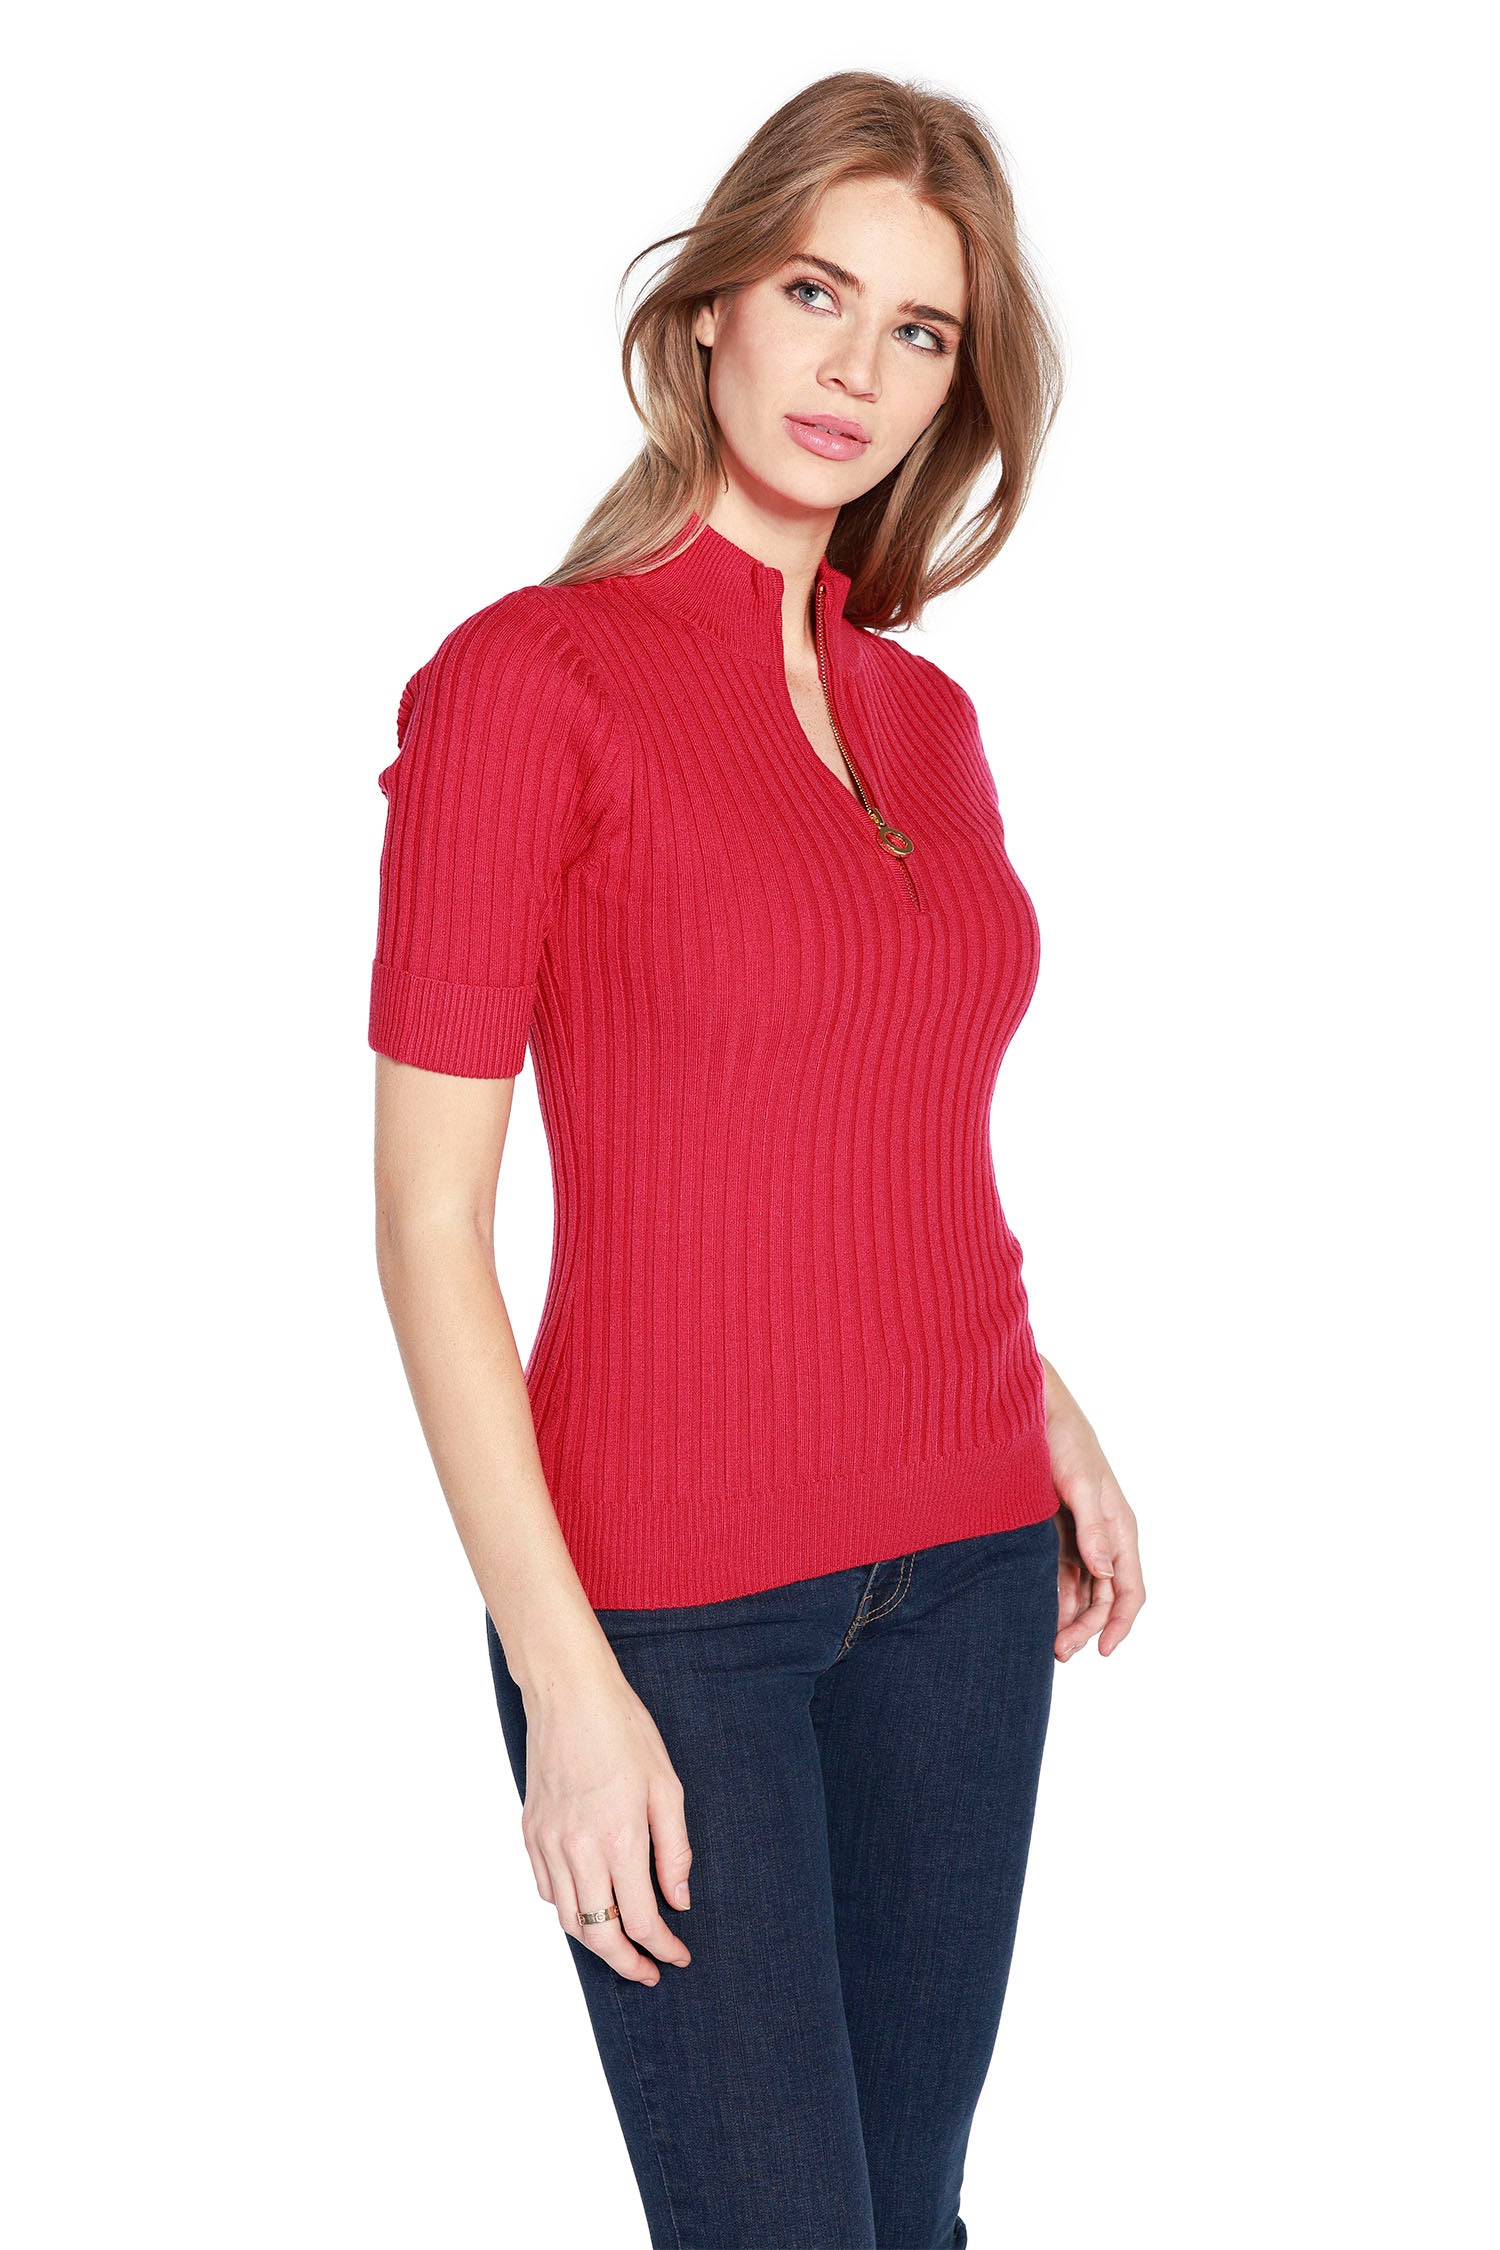 NEW COLORS Women's Pullover Sweater Top with Front Quarter Zip in a Ribbed Knit